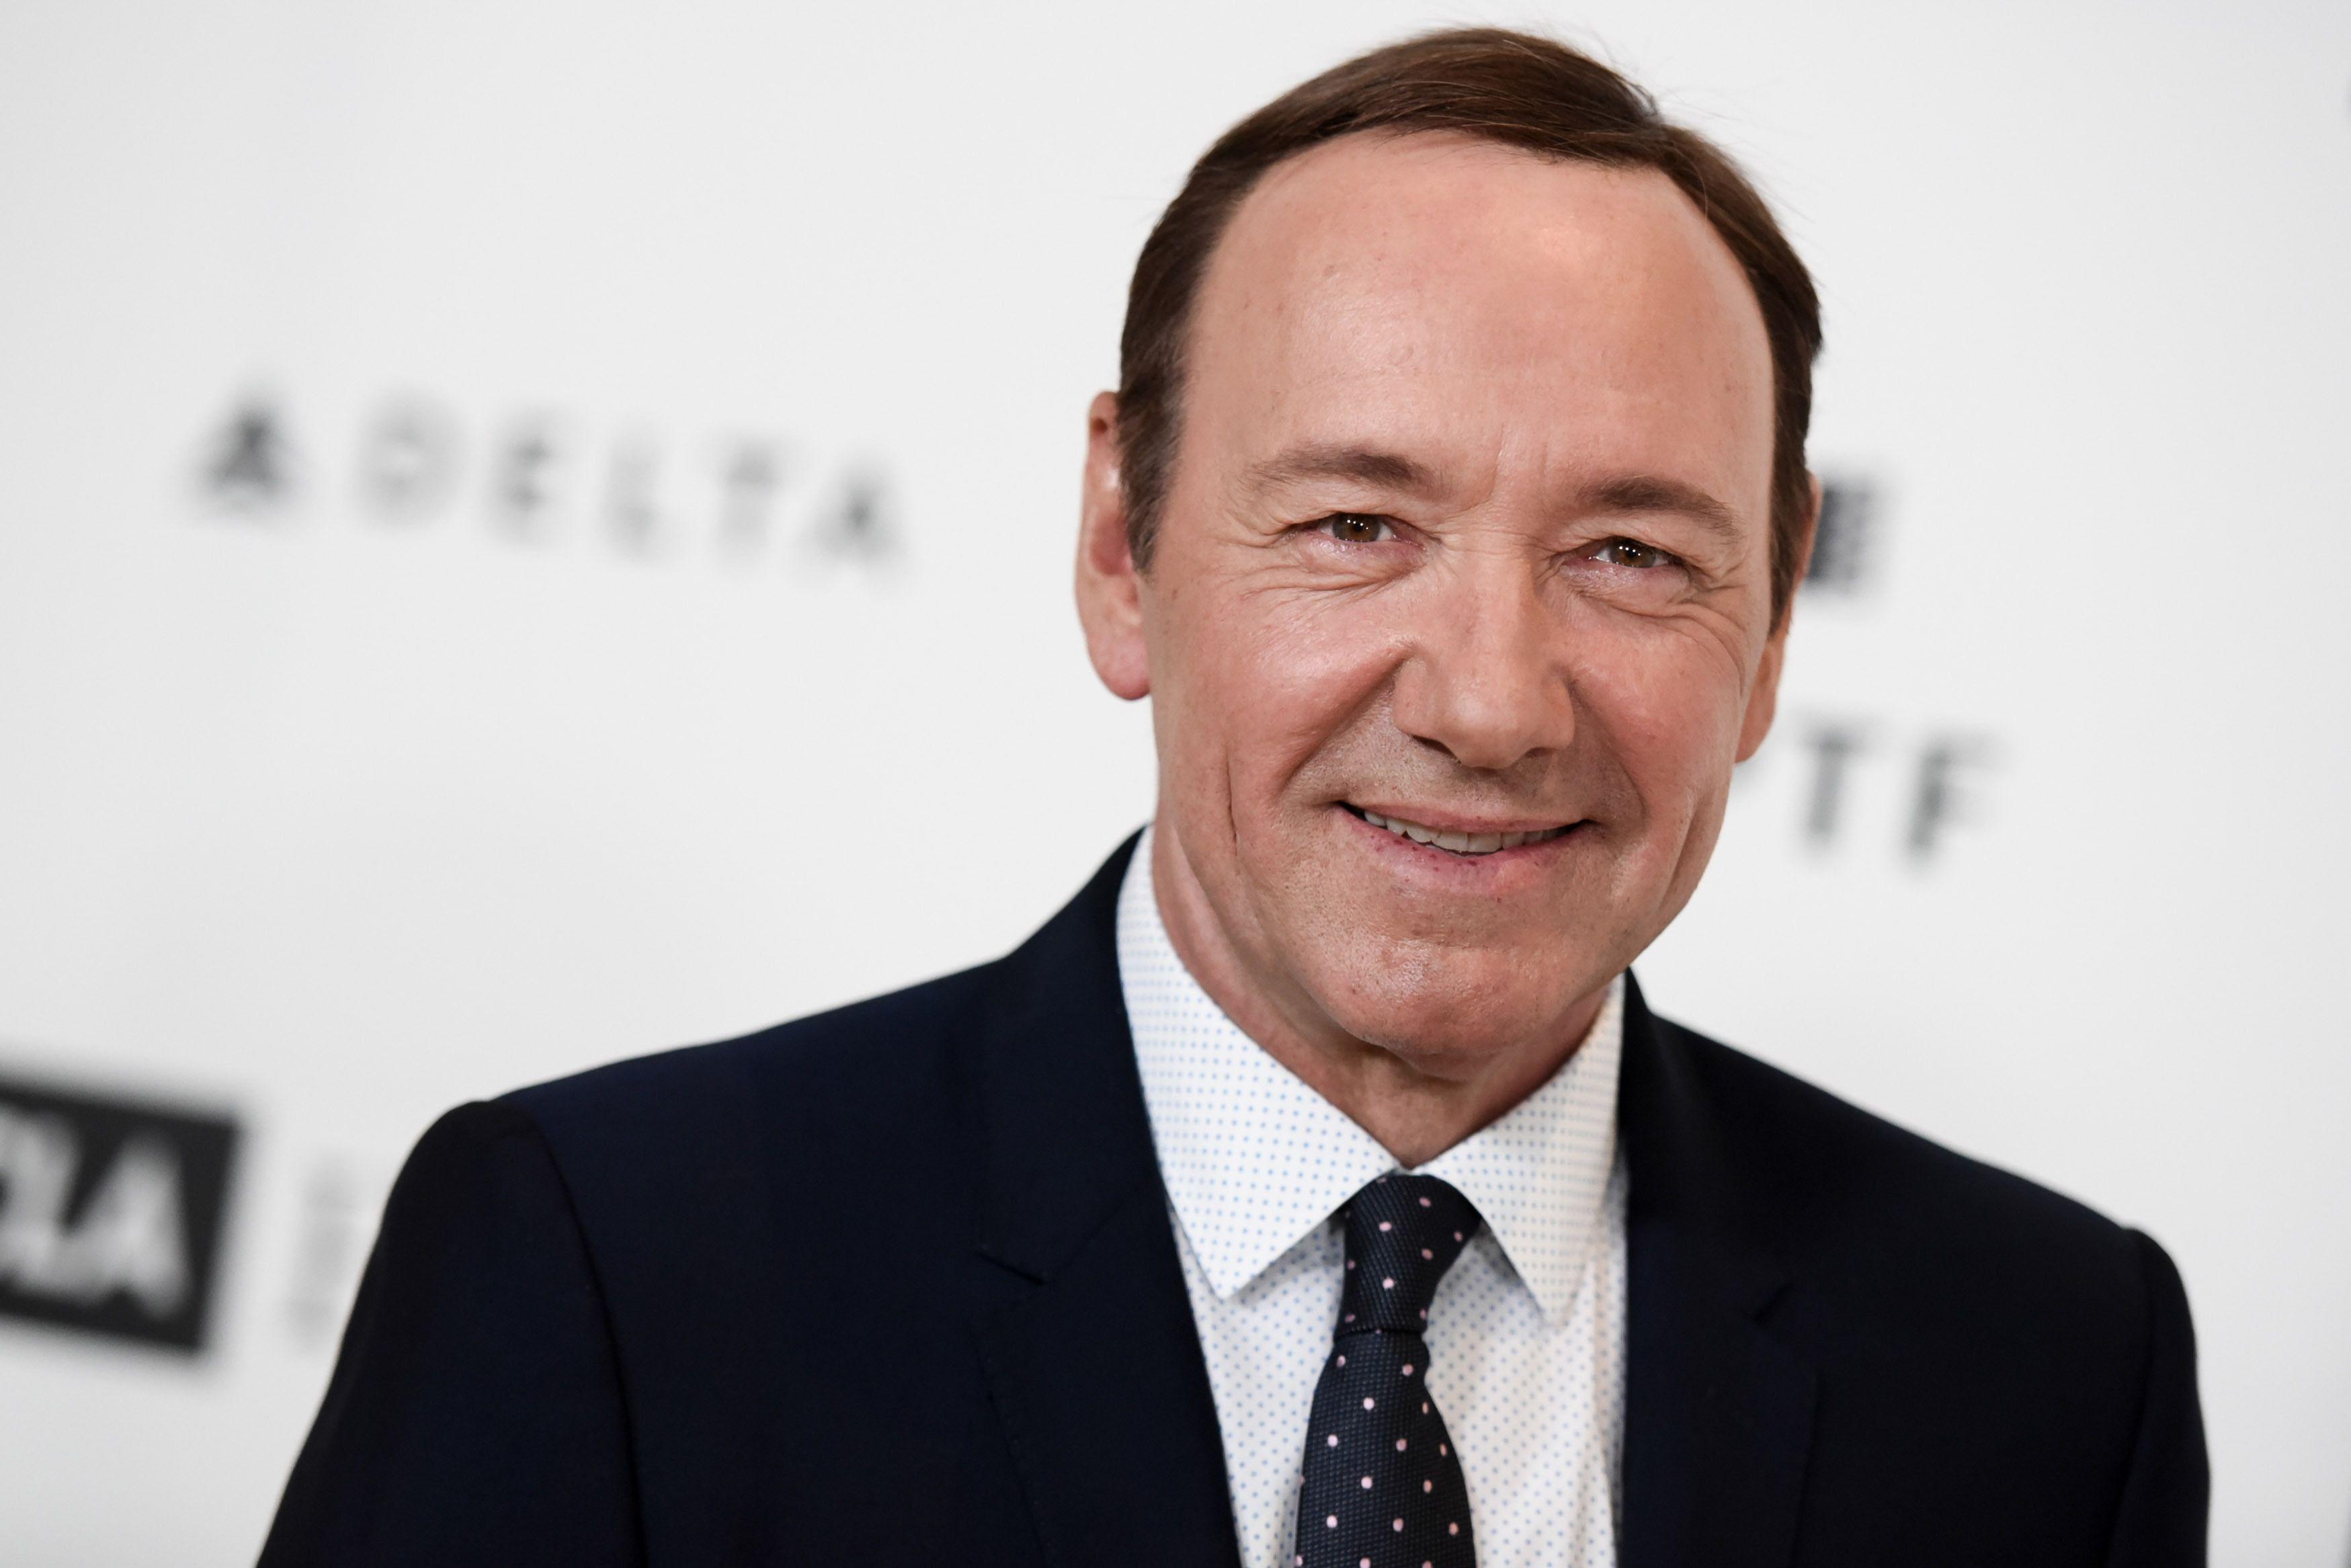 Kevin Spacey Wallpaper Image Photo Picture Background